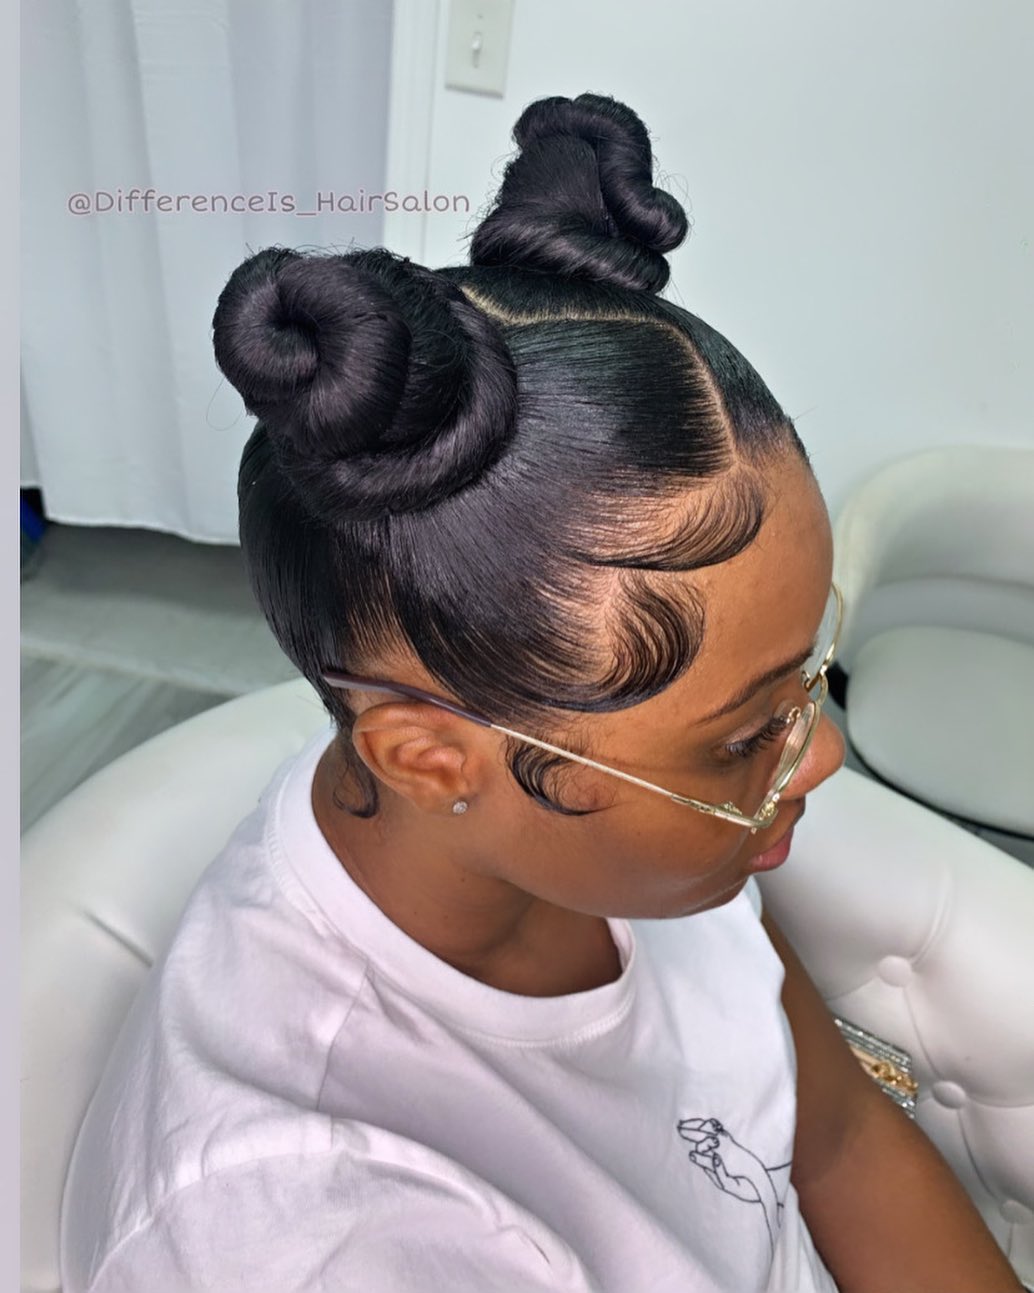 77 Black Hairstyles & Stylist Info (THE Ultimate Guide)